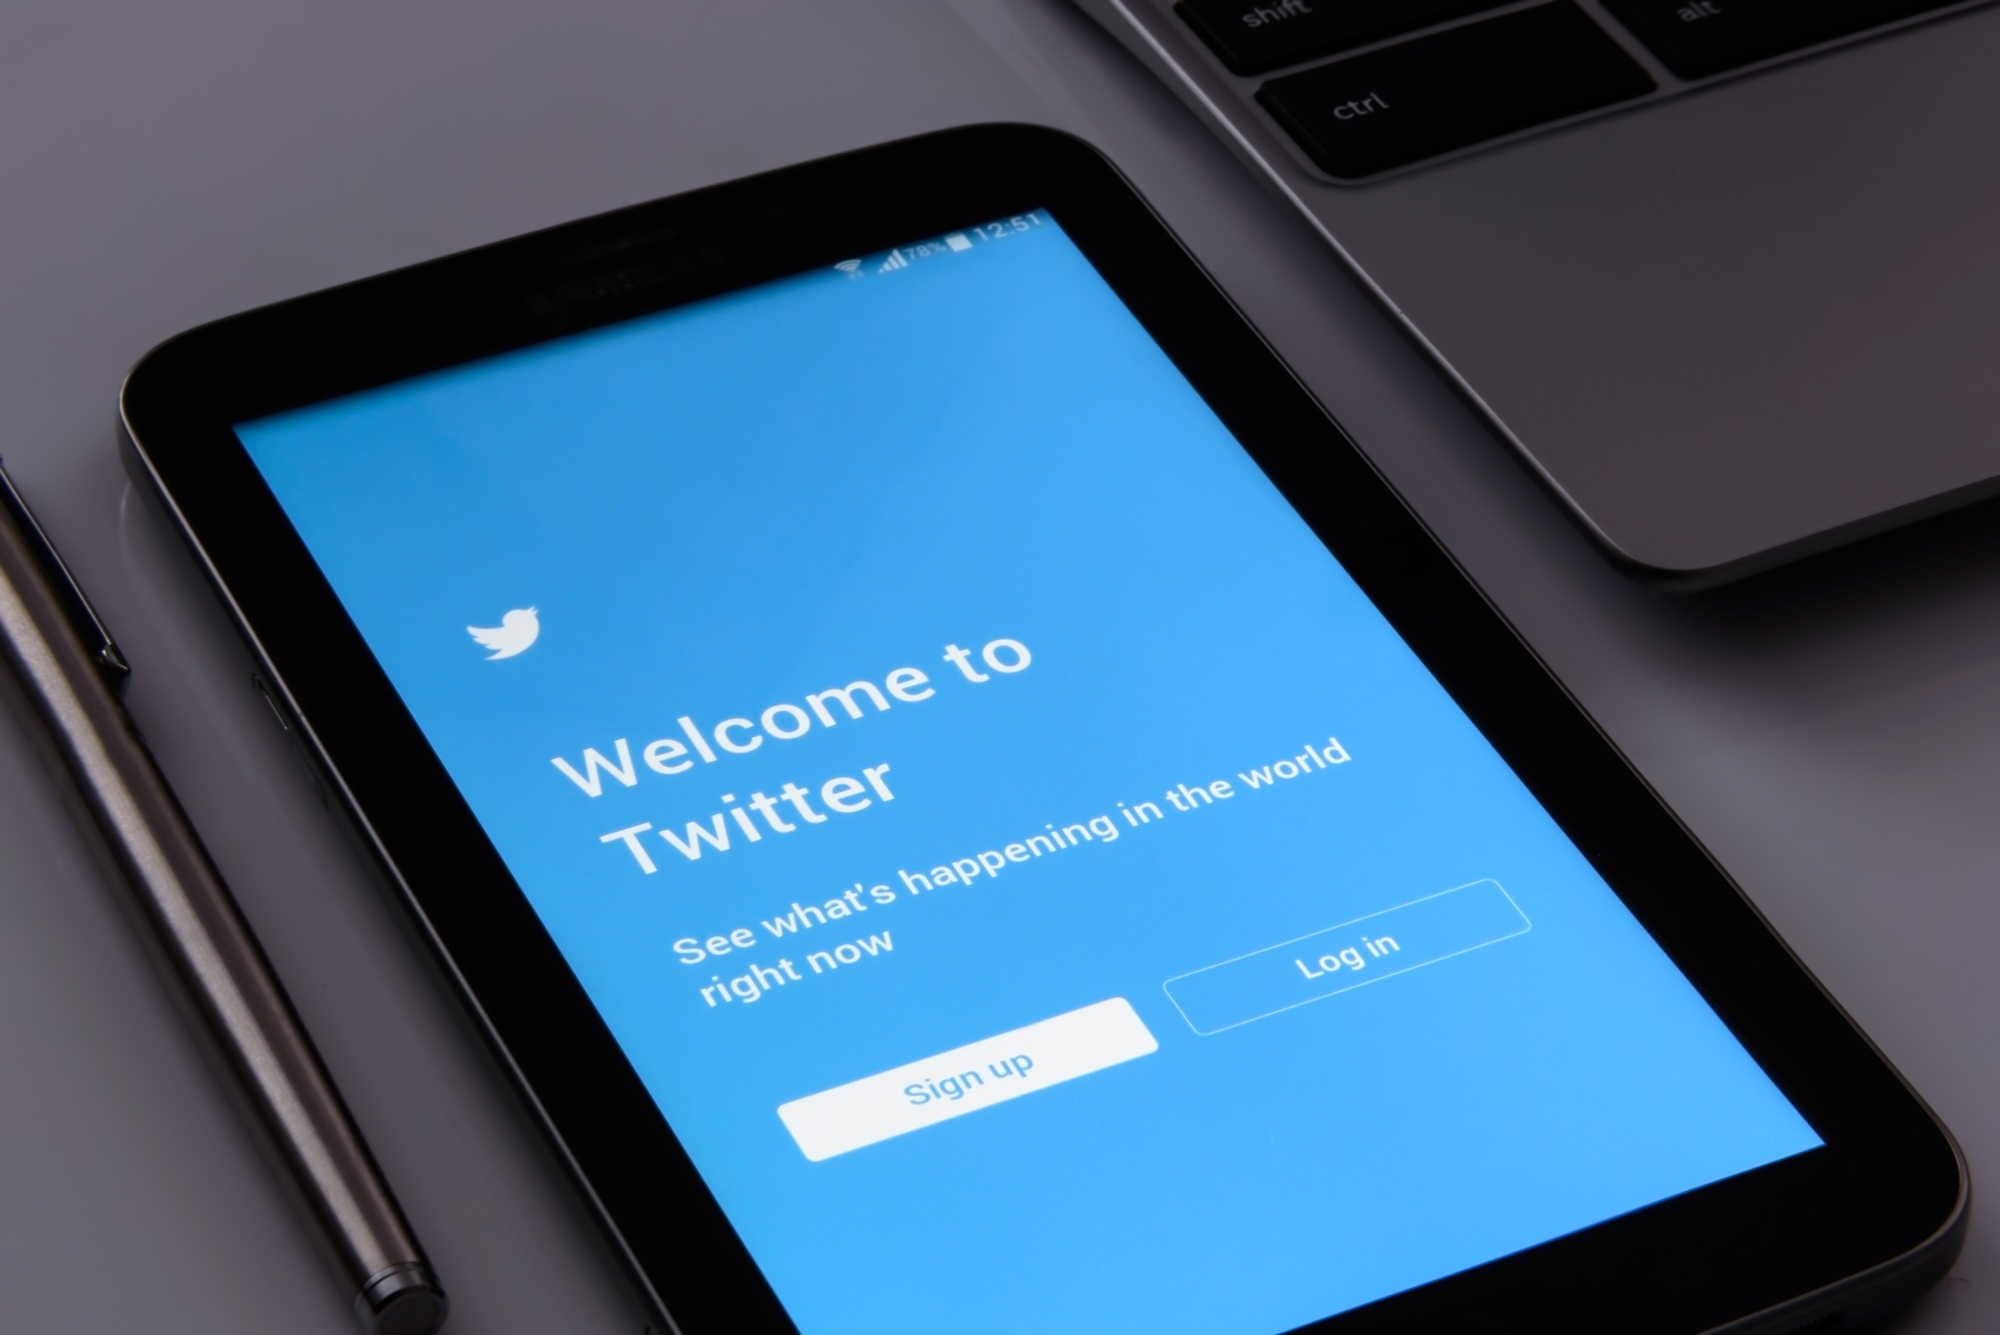 Soar to New Heights: 5 Twitter Marketing Ideas for Small Businesses